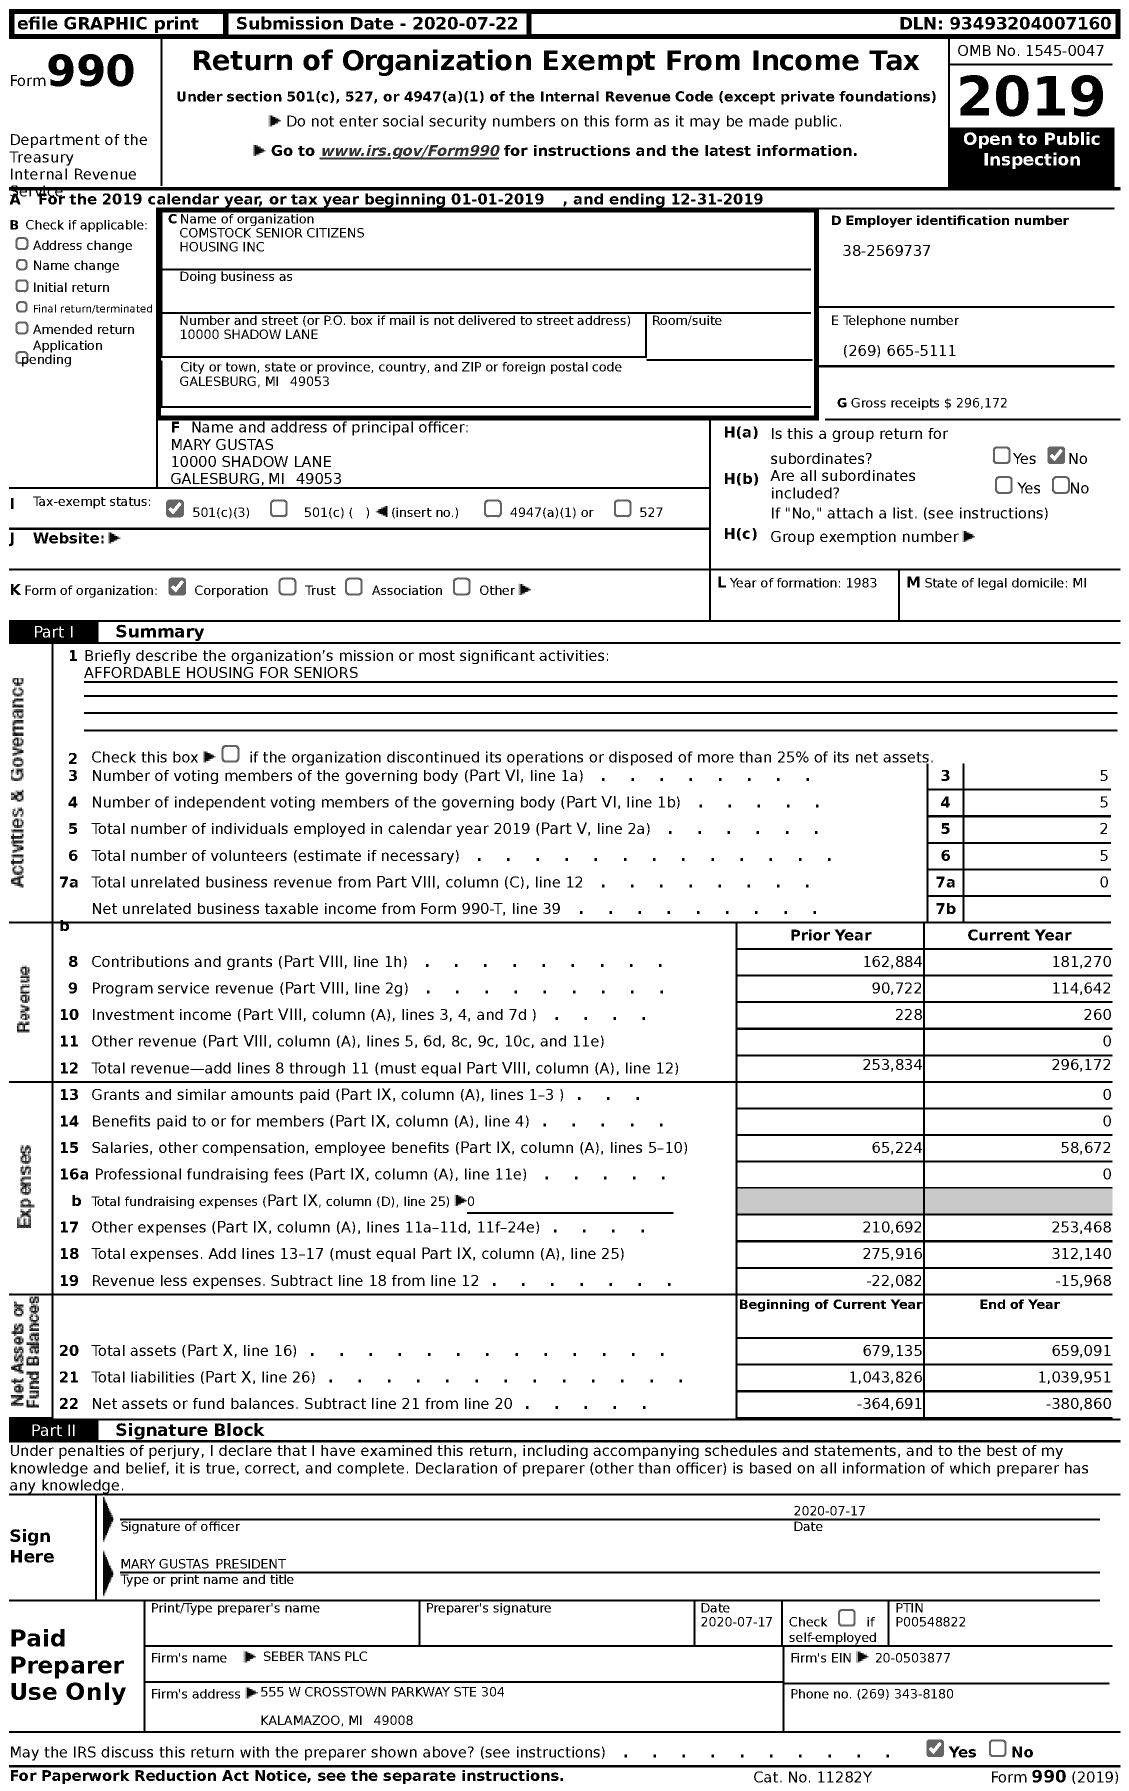 Image of first page of 2019 Form 990 for Comstock Senior Citizens Housing